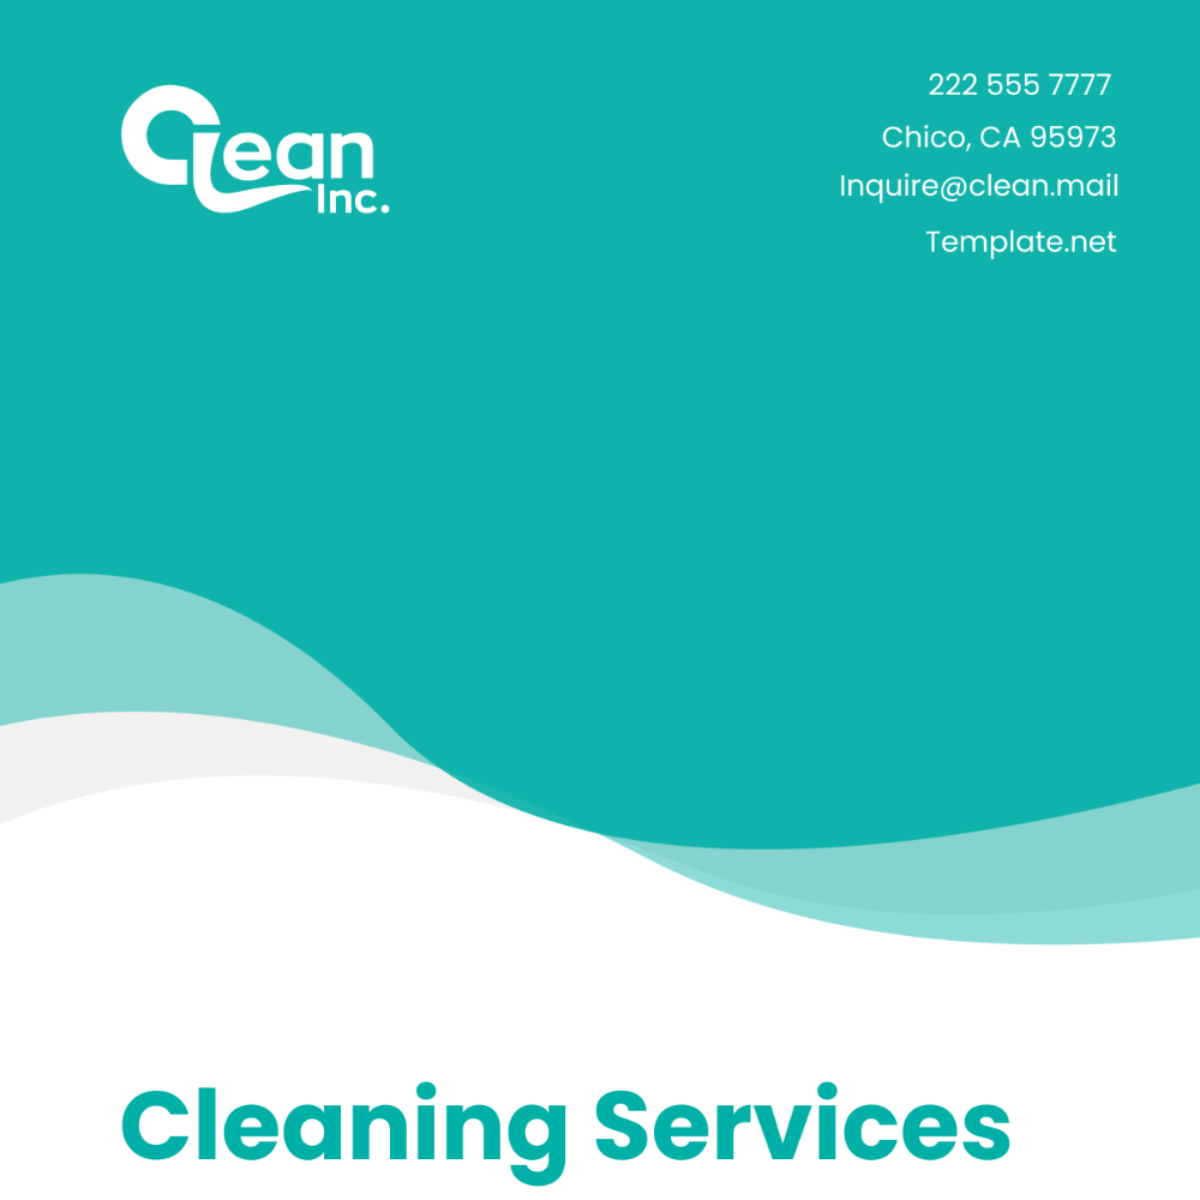 Cleaning Services Business Development Plan Template